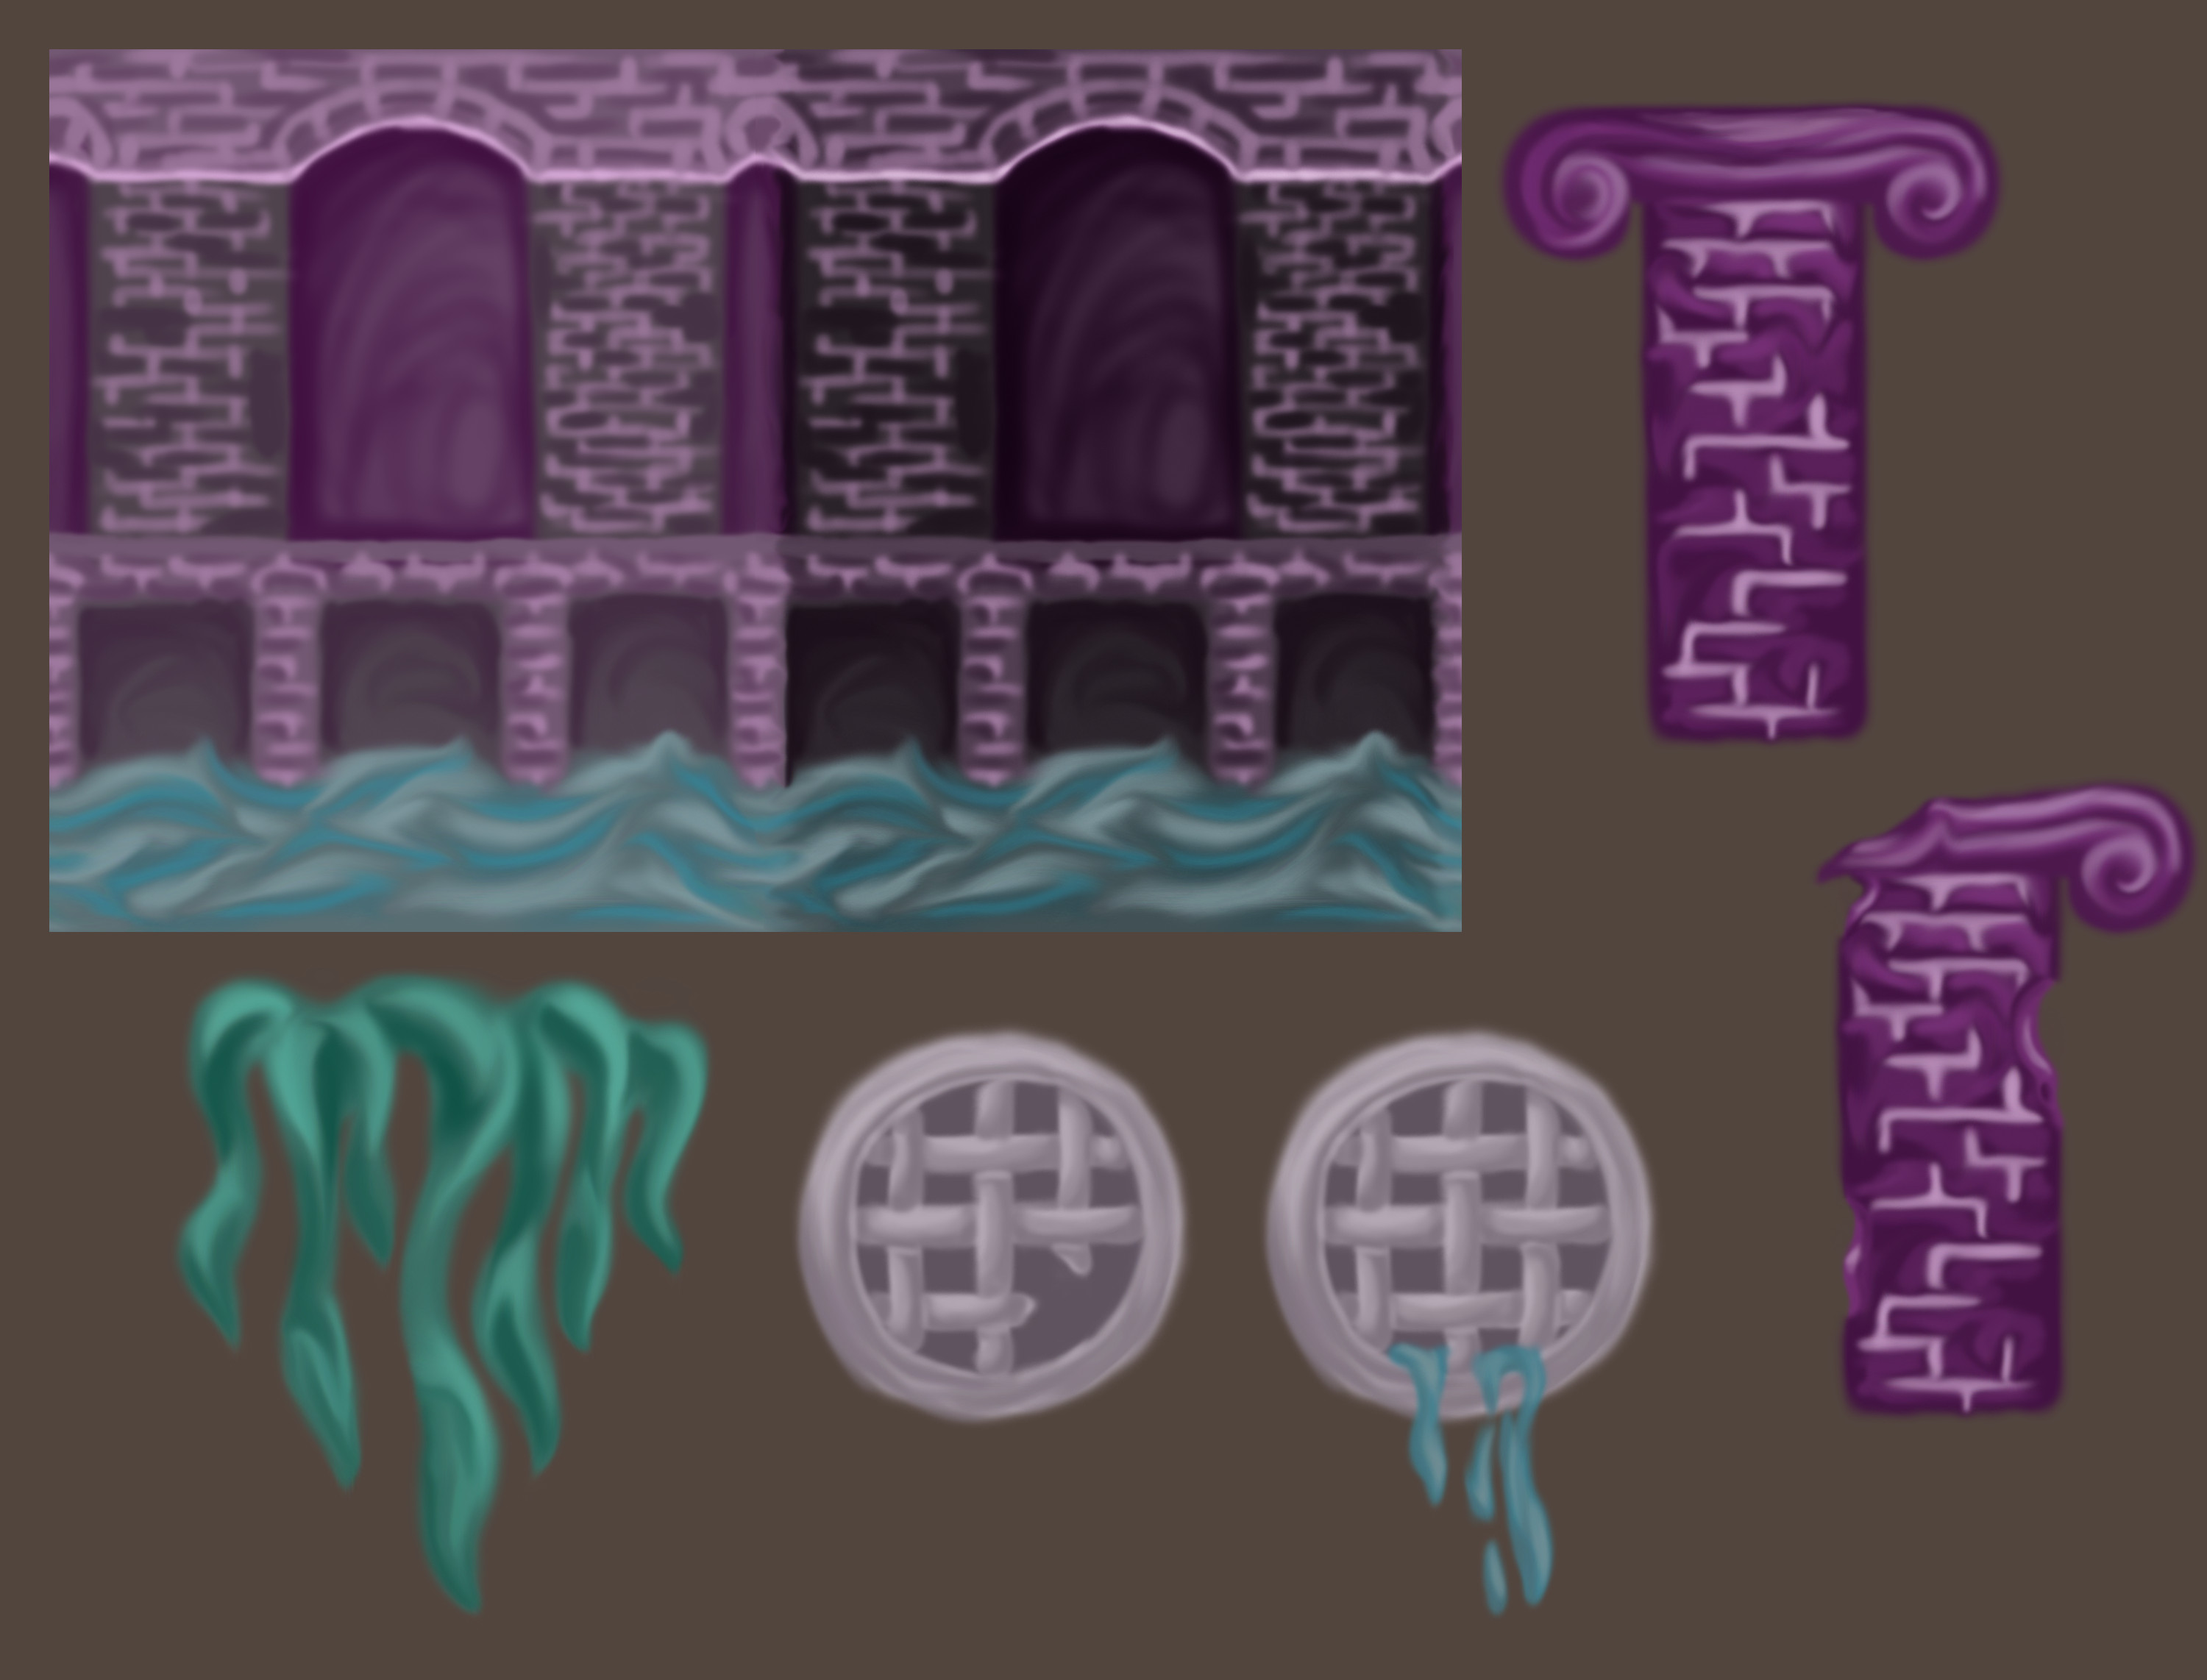 Sewer Background Assets provided on request. The main background is actually provided is several layers so that they can be adjusted as needed.